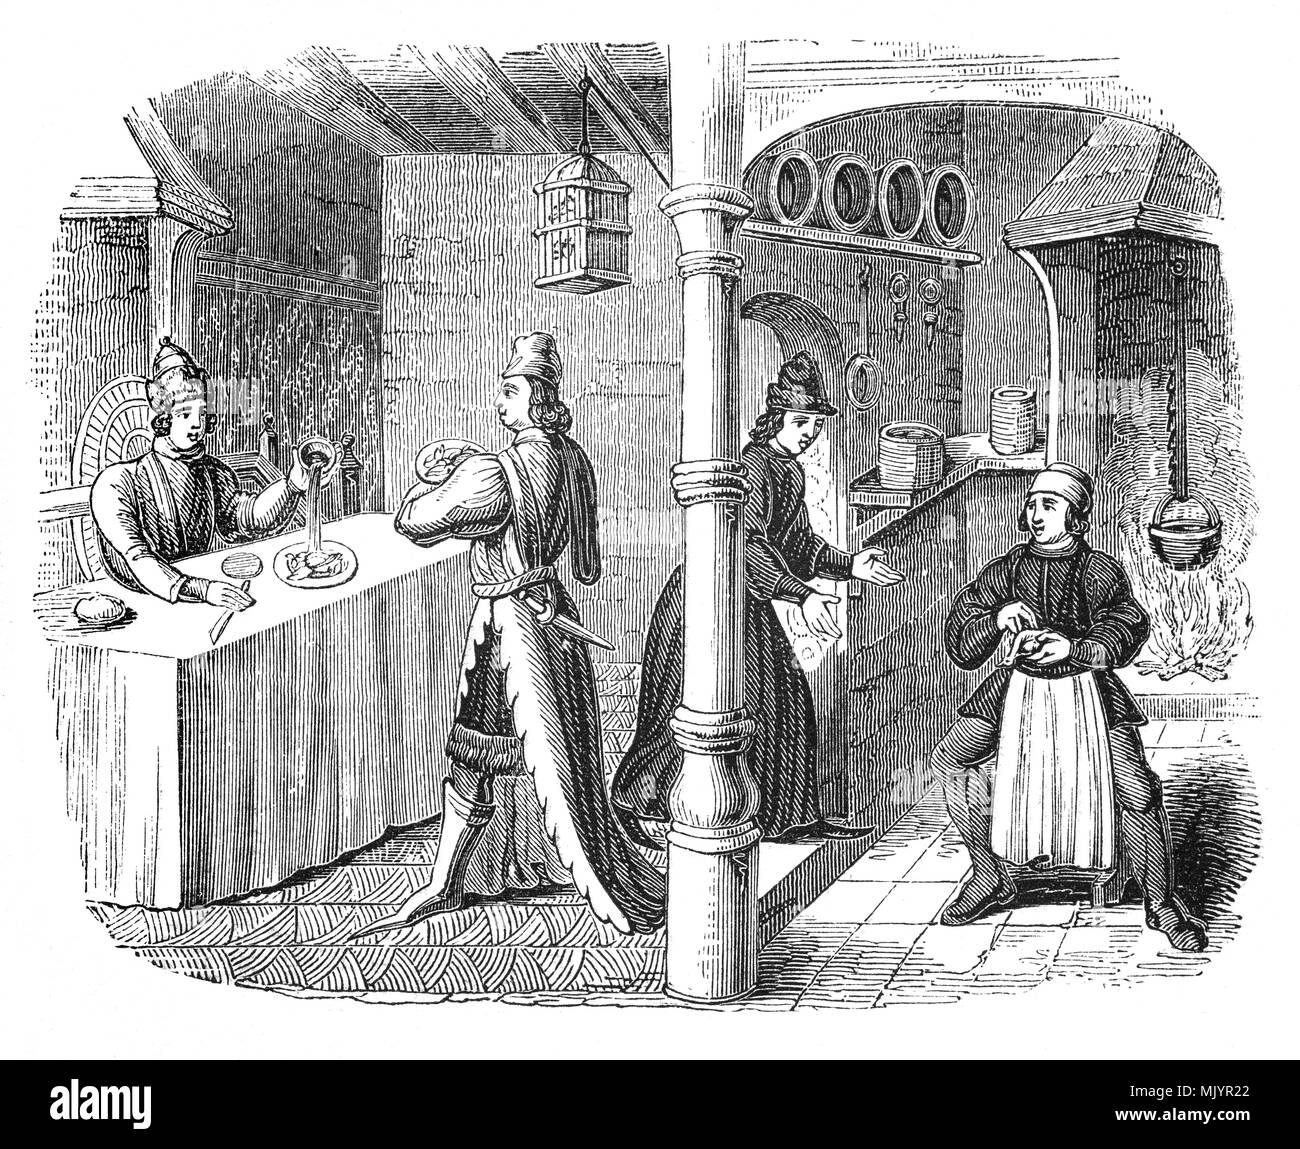 In most medieval households, cooking was done on an open hearth in the middle of the main living area, to make efficient use of the heat. This was the most common arrangement, even in wealthy households, where the kitchen was combined with the dining hall.  Tools  specific to cooking over an open fire were spits of various sizes, and material for skewering anything from delicate quails to whole oxen, along with adjustable hooks for pots and cauldrons. Stock Photo